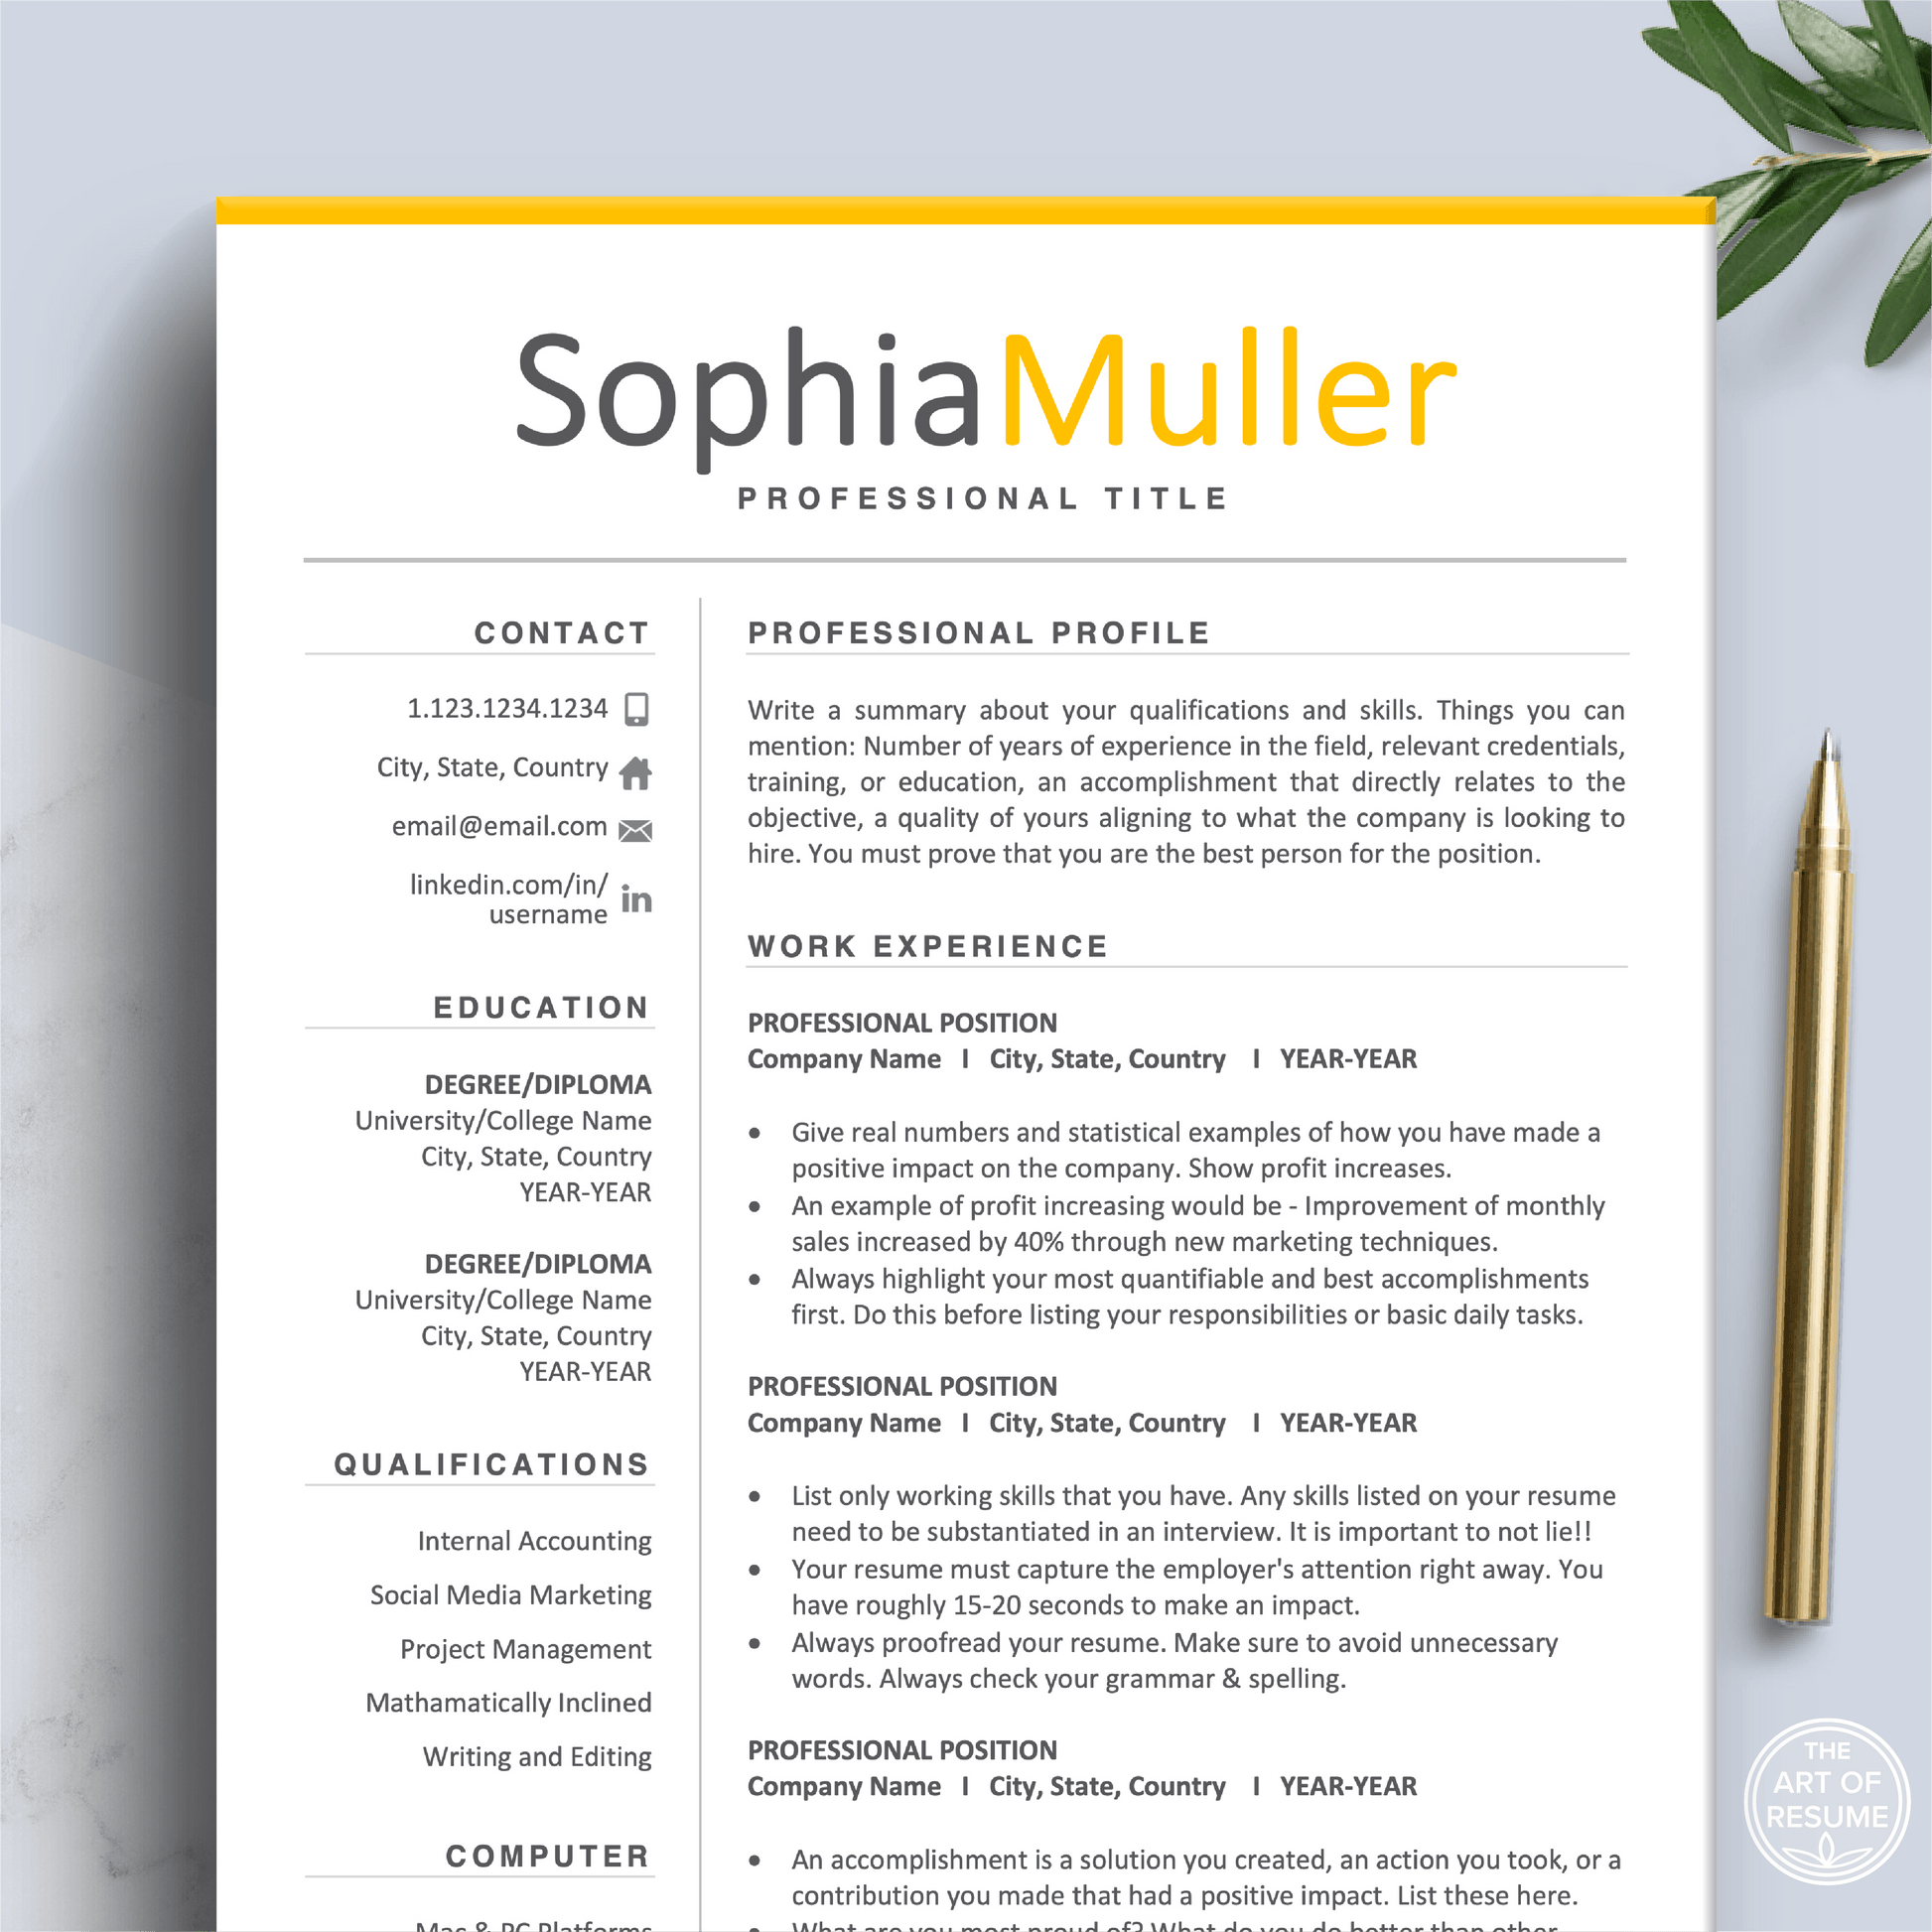 Professional Resume CV Template | Executive Resume Format | Resume Writing Guide - The Art of Resume